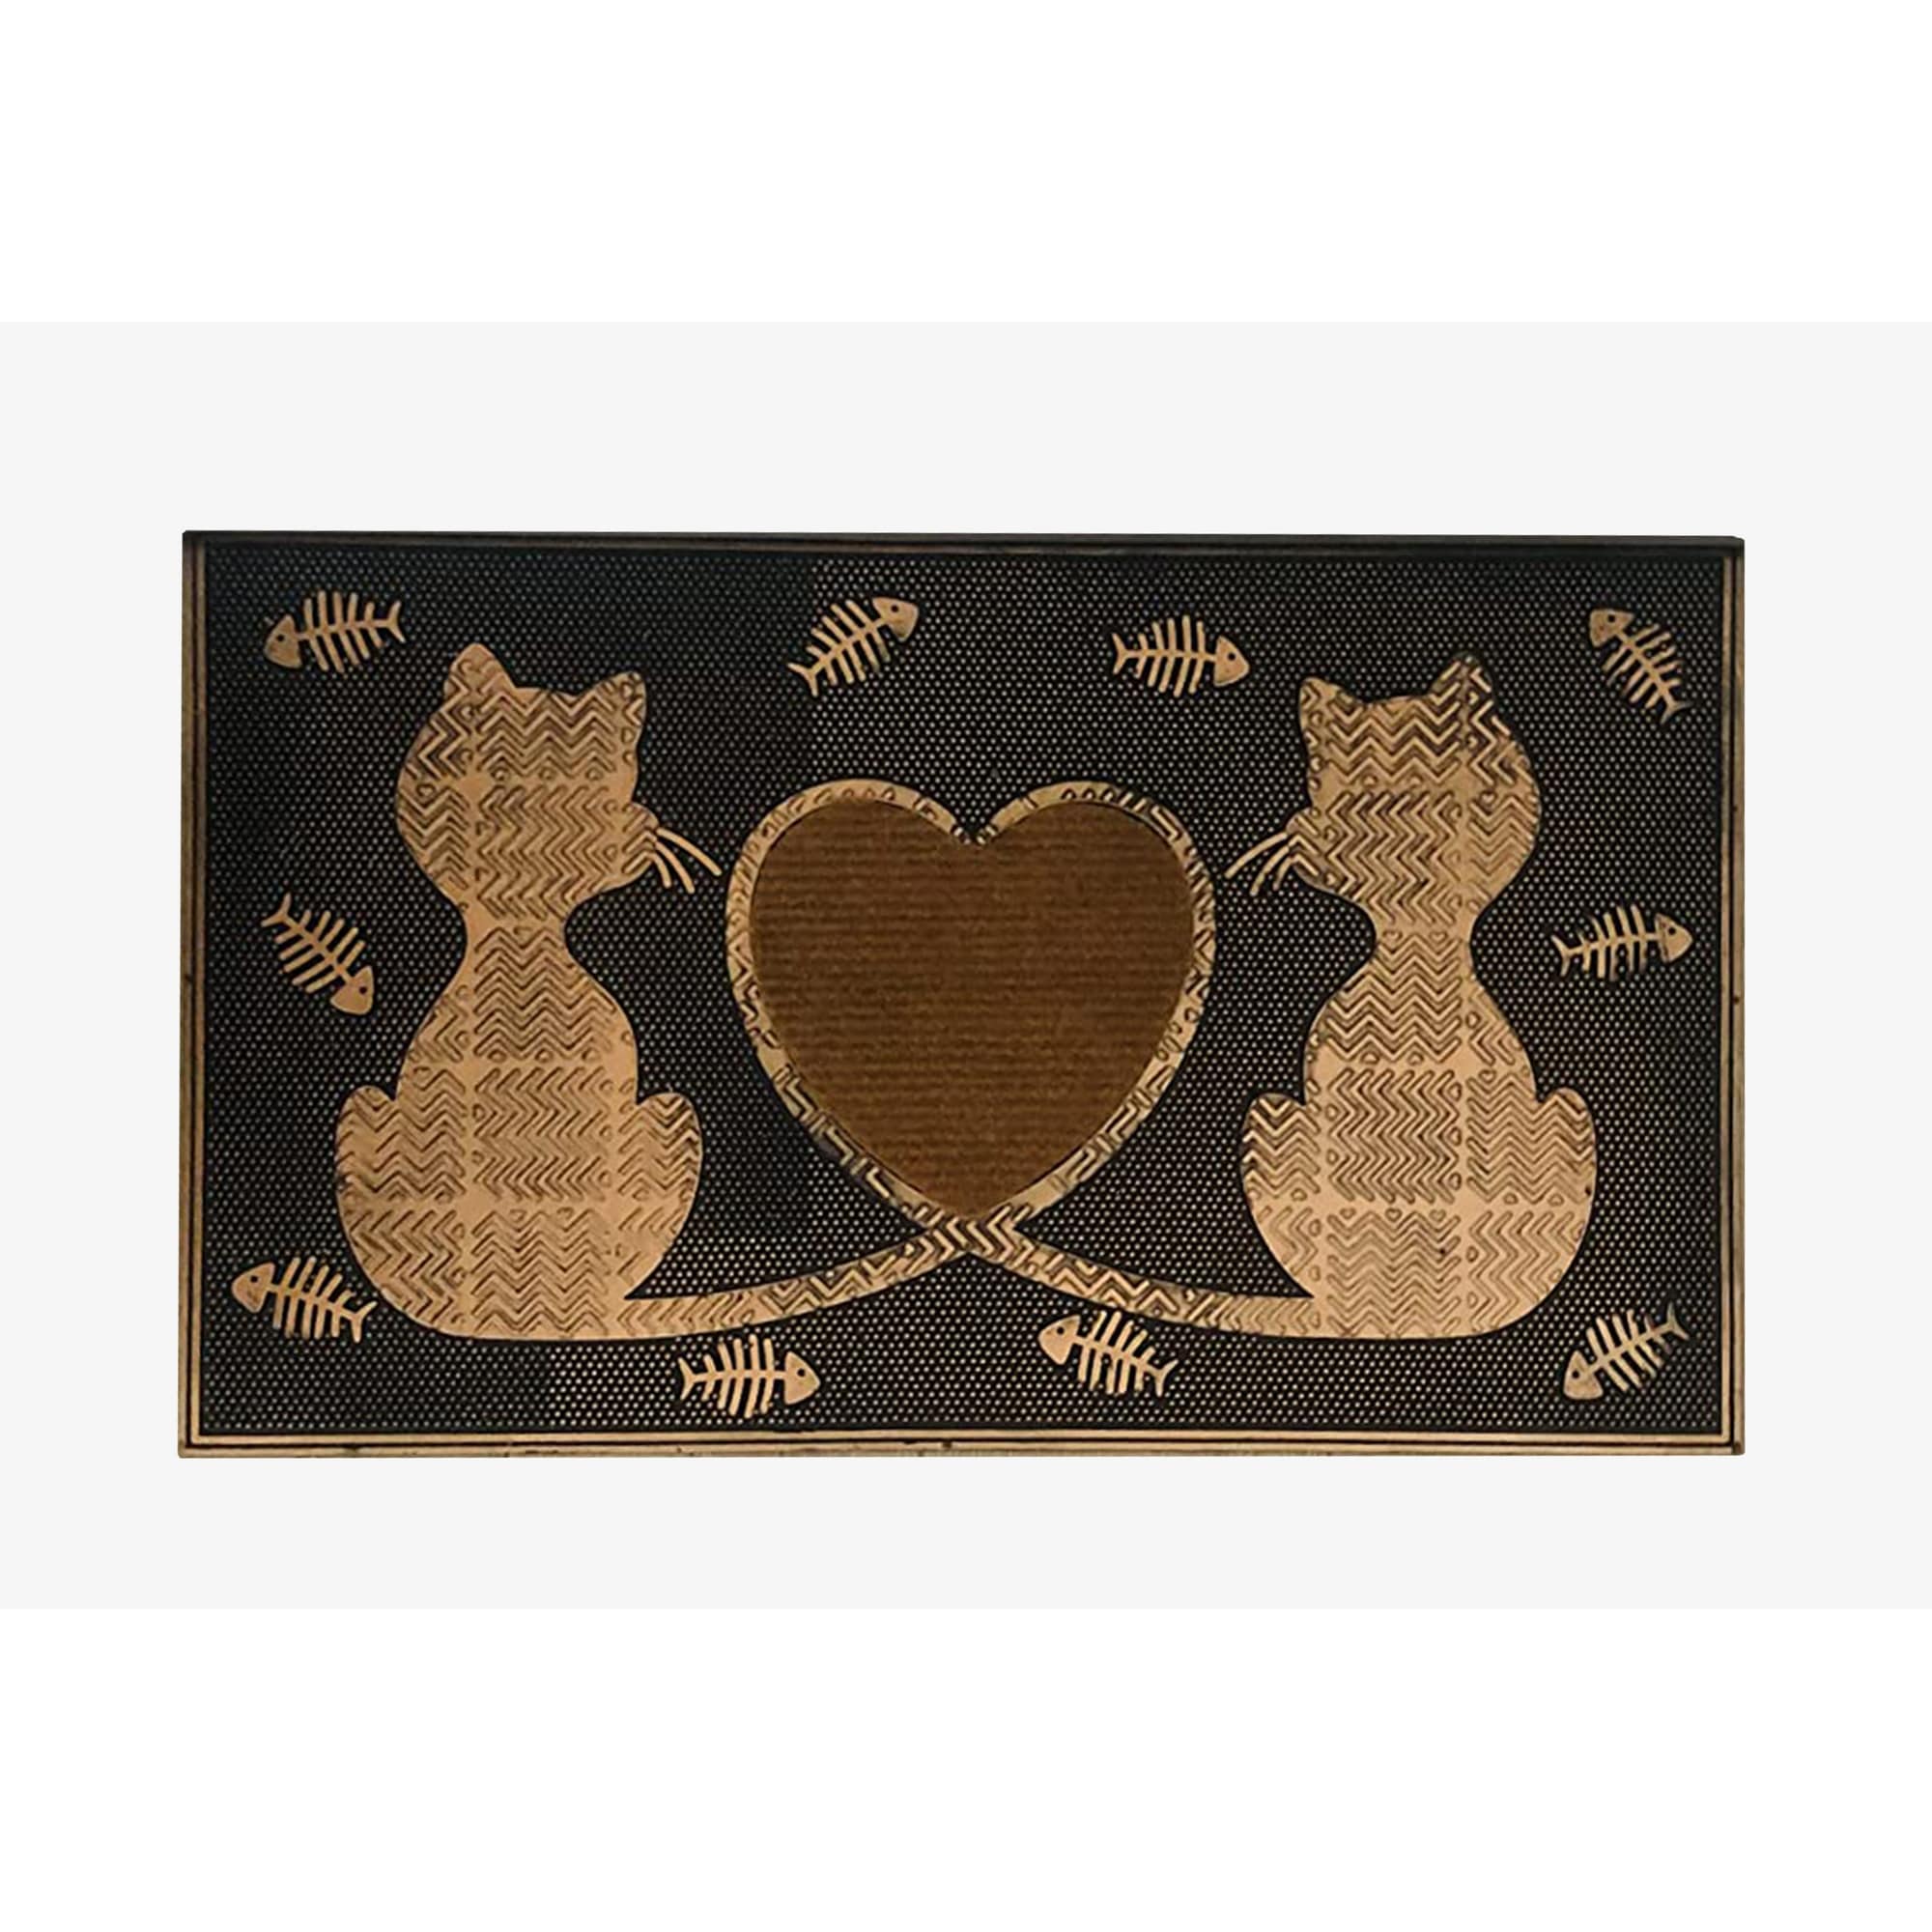 https://ak1.ostkcdn.com/images/products/is/images/direct/a2ba06ab953313fcedd8a3ea4f05b9589aa46333/First-Impression-Rubber-Twin-Heart-Cat-Doormat.jpg